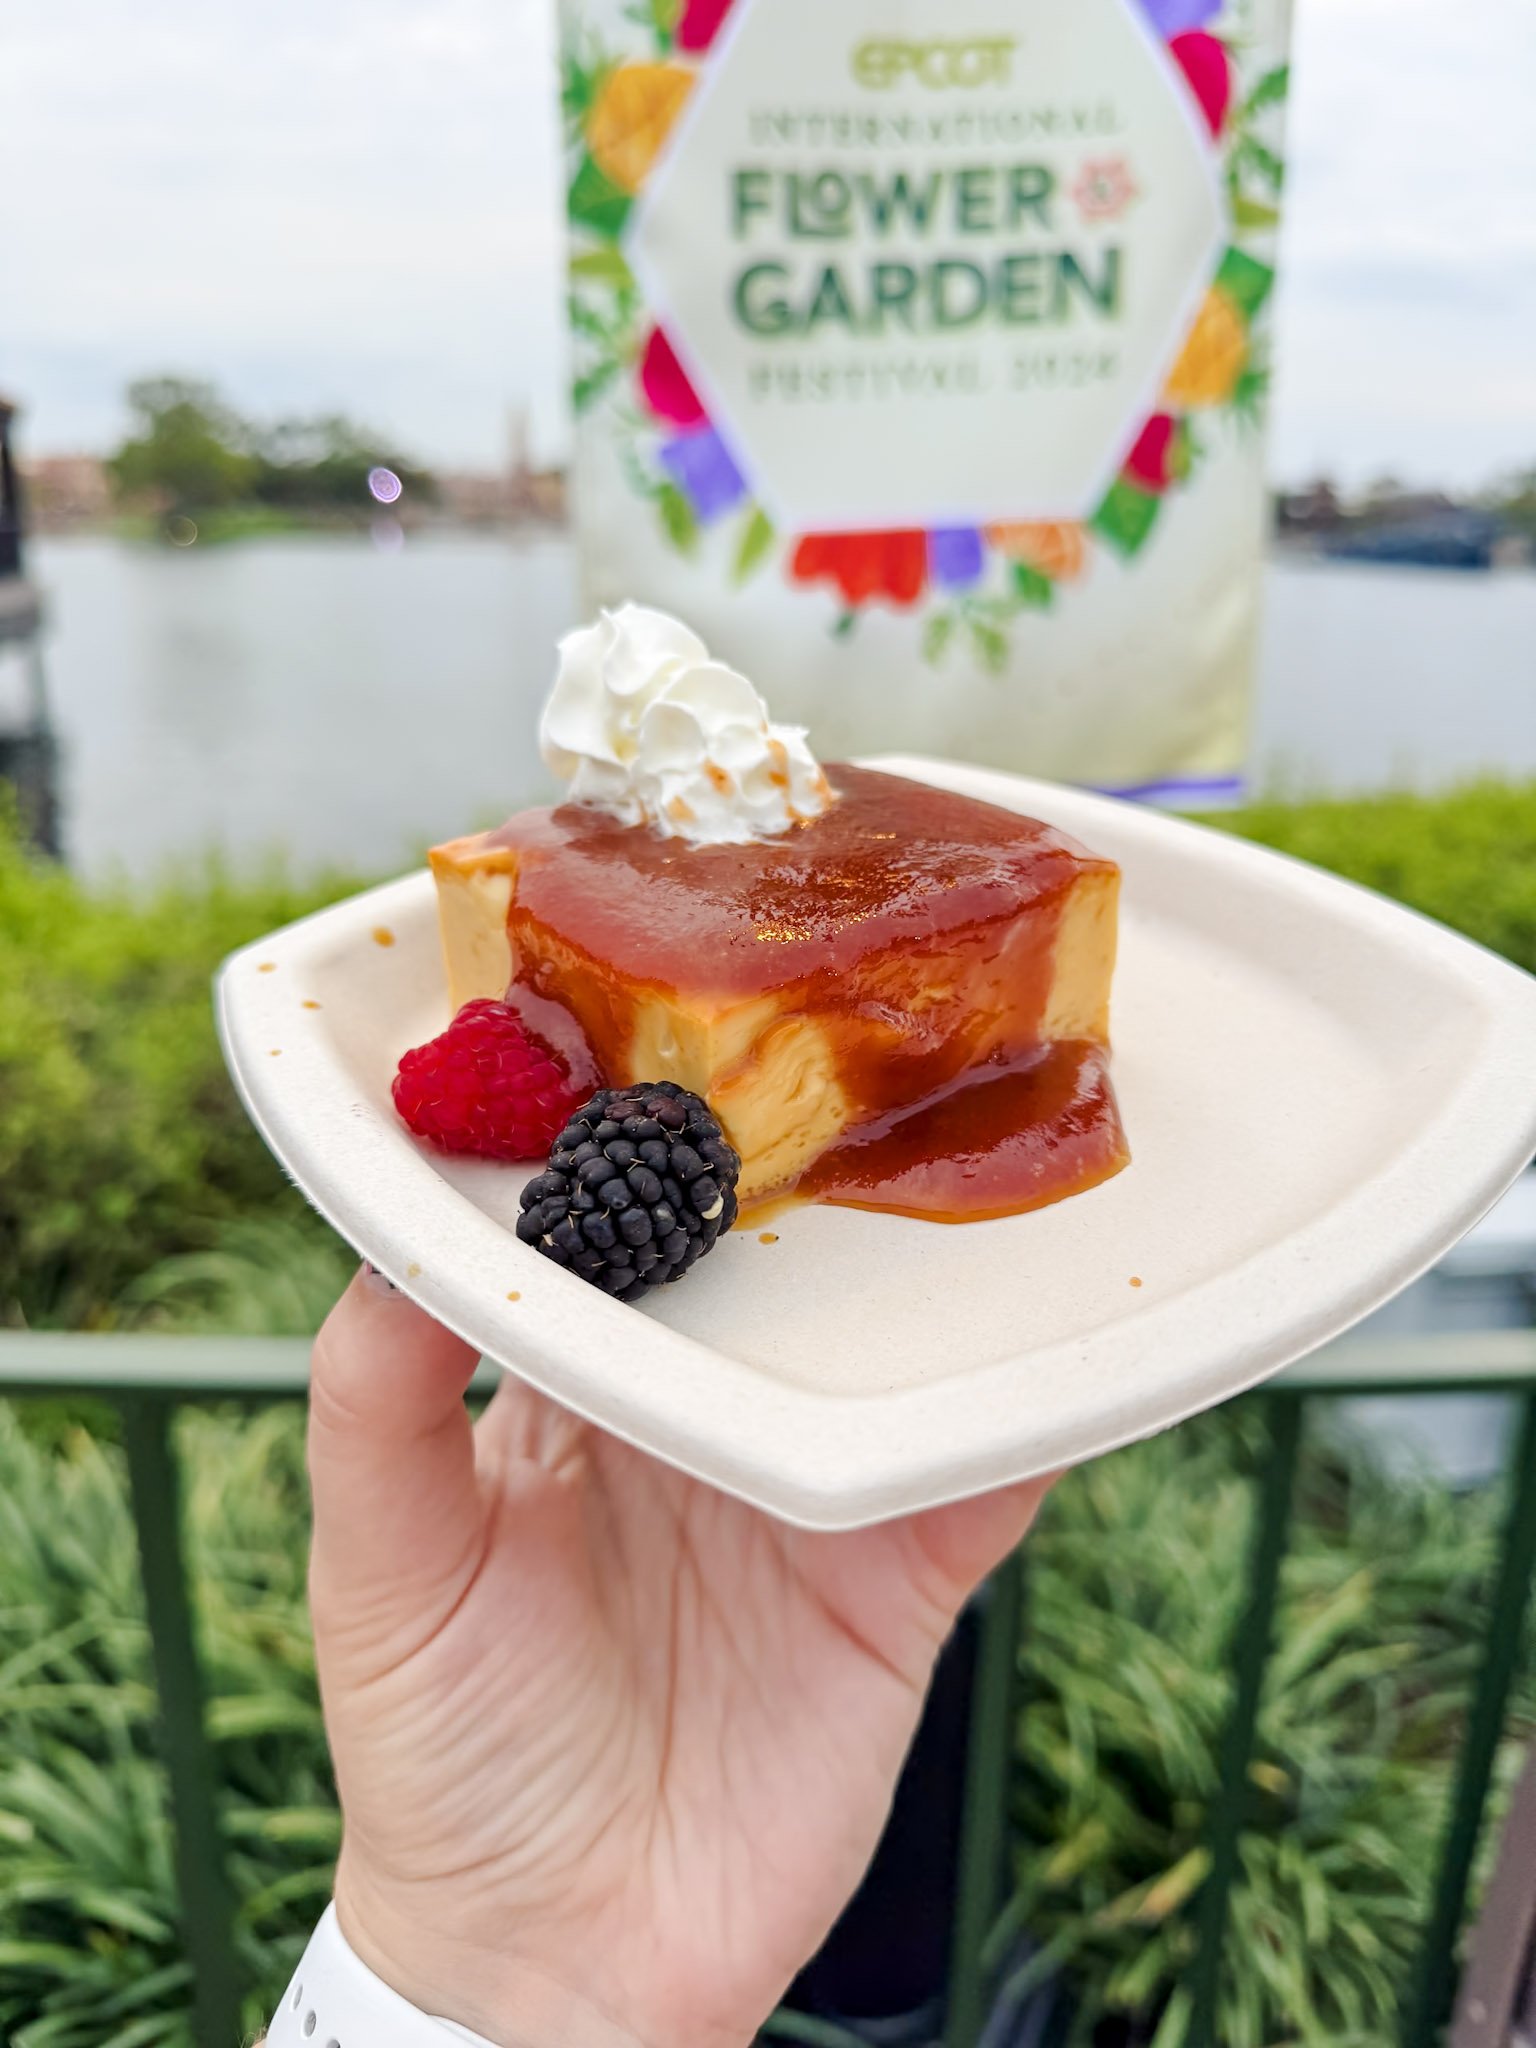 Flan de Guayaba: Vanilla flan with guava coulis, whipped cream, and fresh fruit